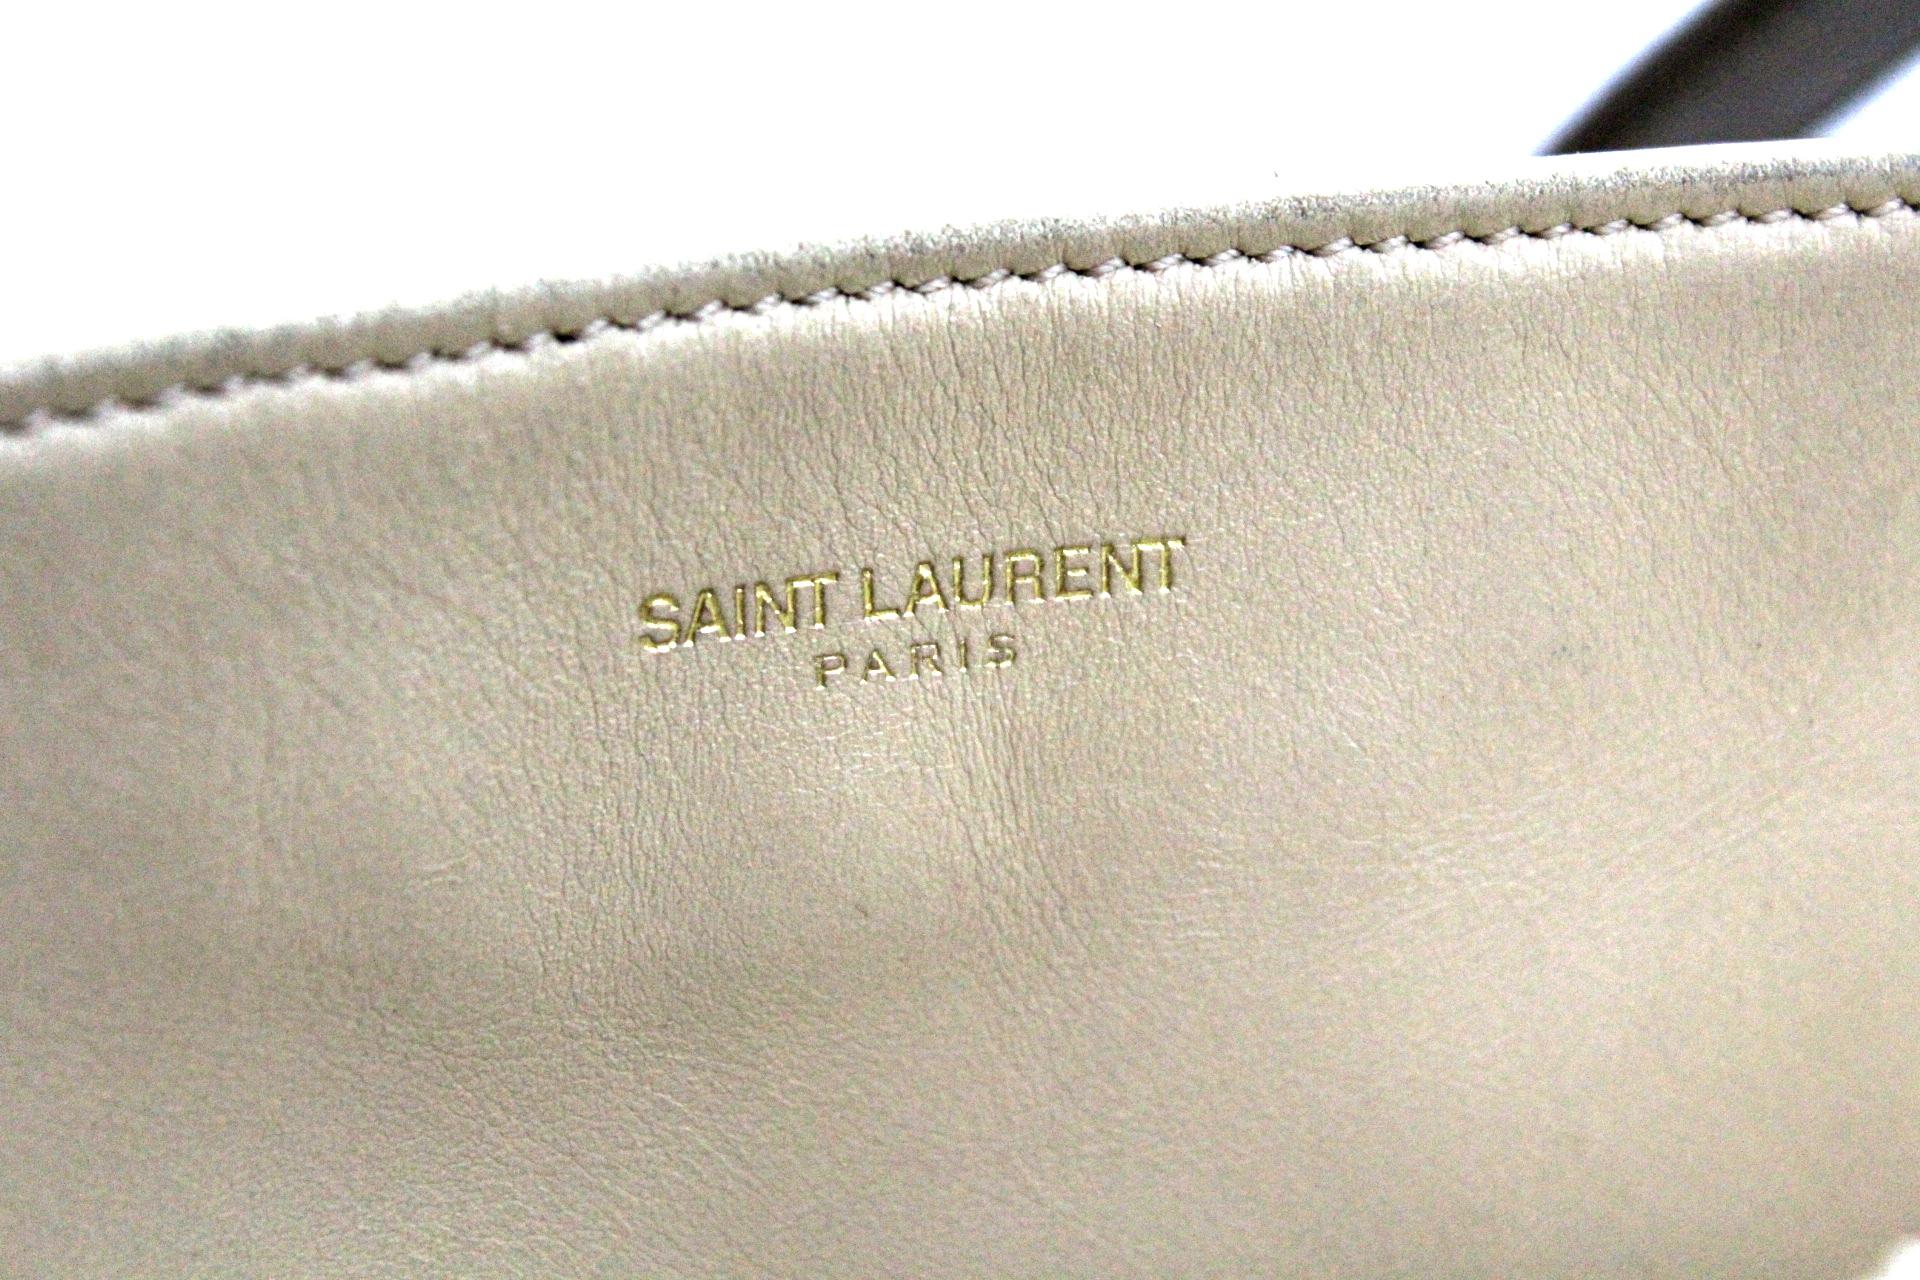 Saint Laurent Shopping Bag made of black suede and beige leather. The bag has no zip or magnetic flap closure so it is open. Internally it is equipped with a small clutch and a zippered pocket. Excellent as a daily bag to use for work or to go out.